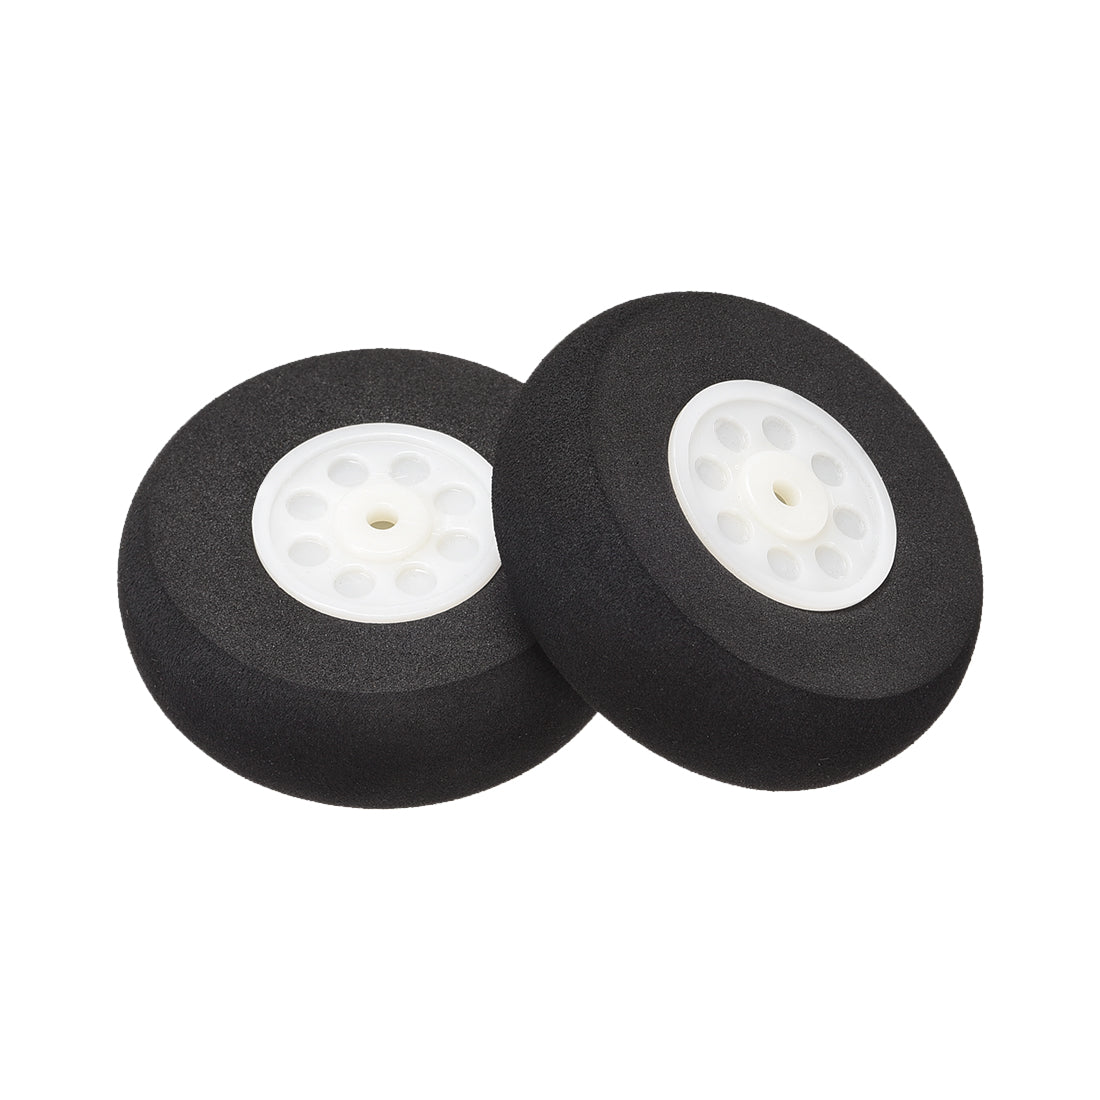 uxcell Uxcell RC Airplane Wheels - 4PCS RC Airplane Aircraft Sponge Wheels 2 inch x 0.11 inch